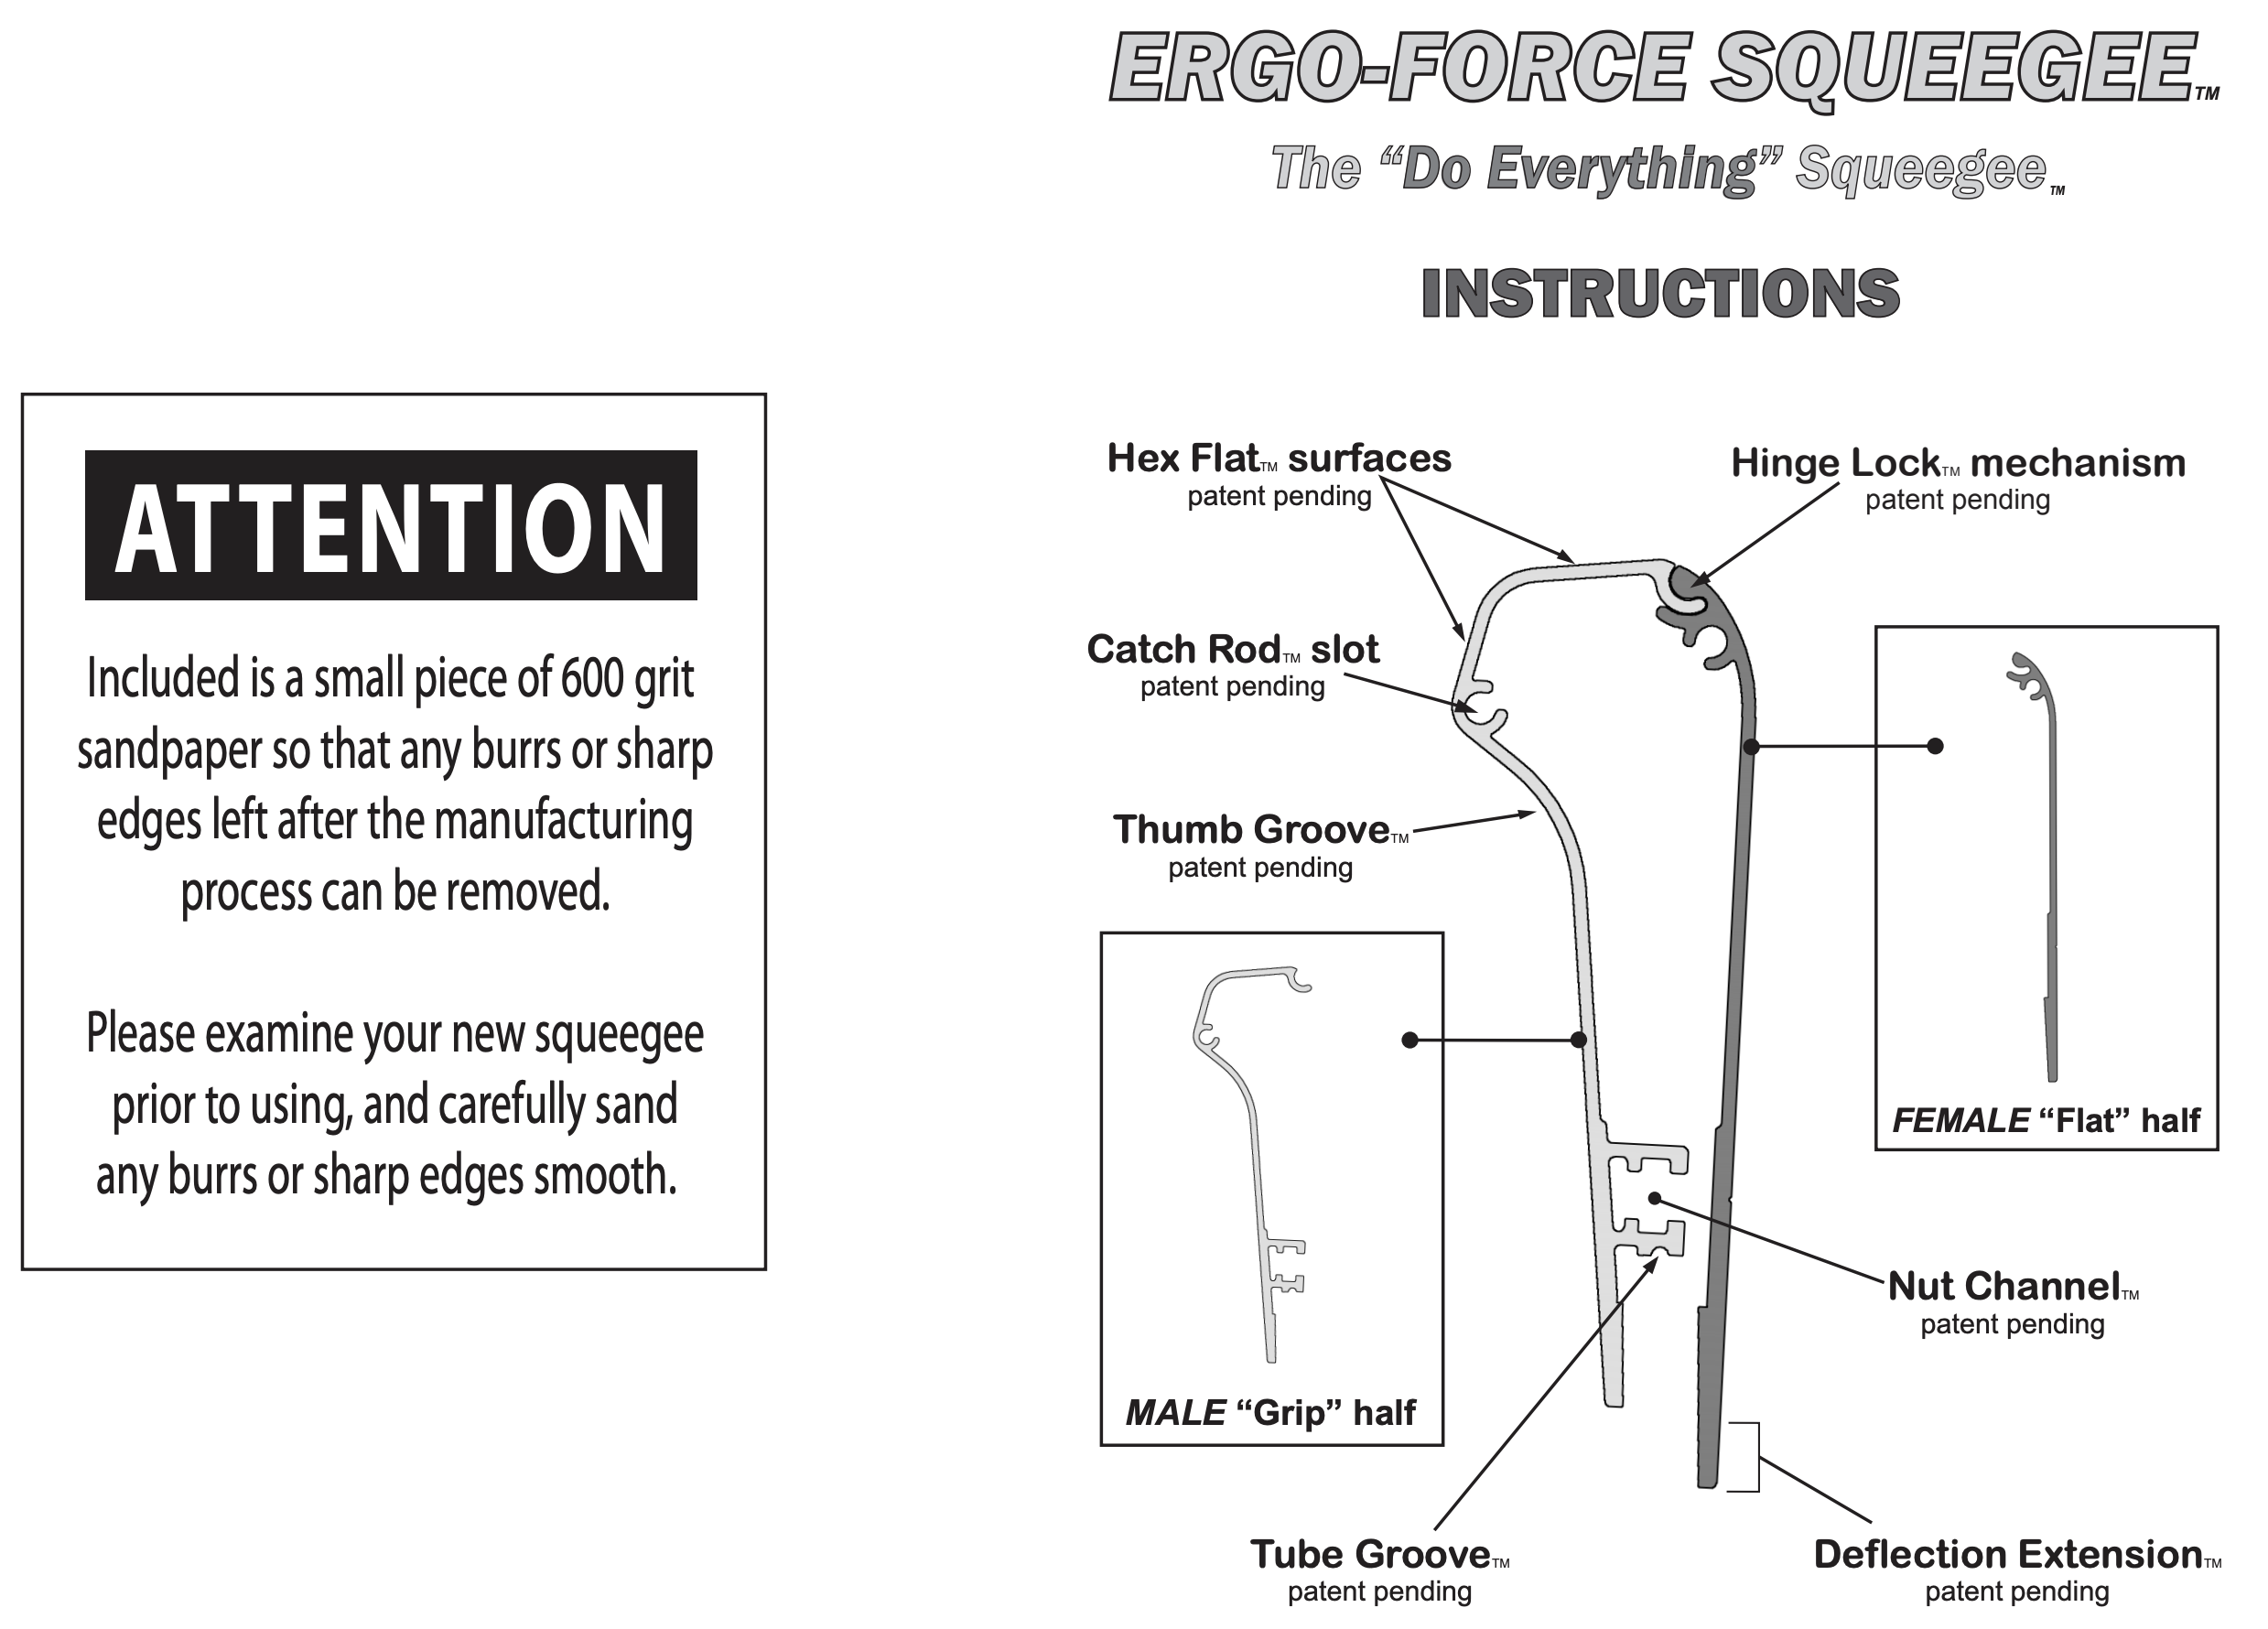 ergo-force-squeegee-screen-printing-instructions-page-1